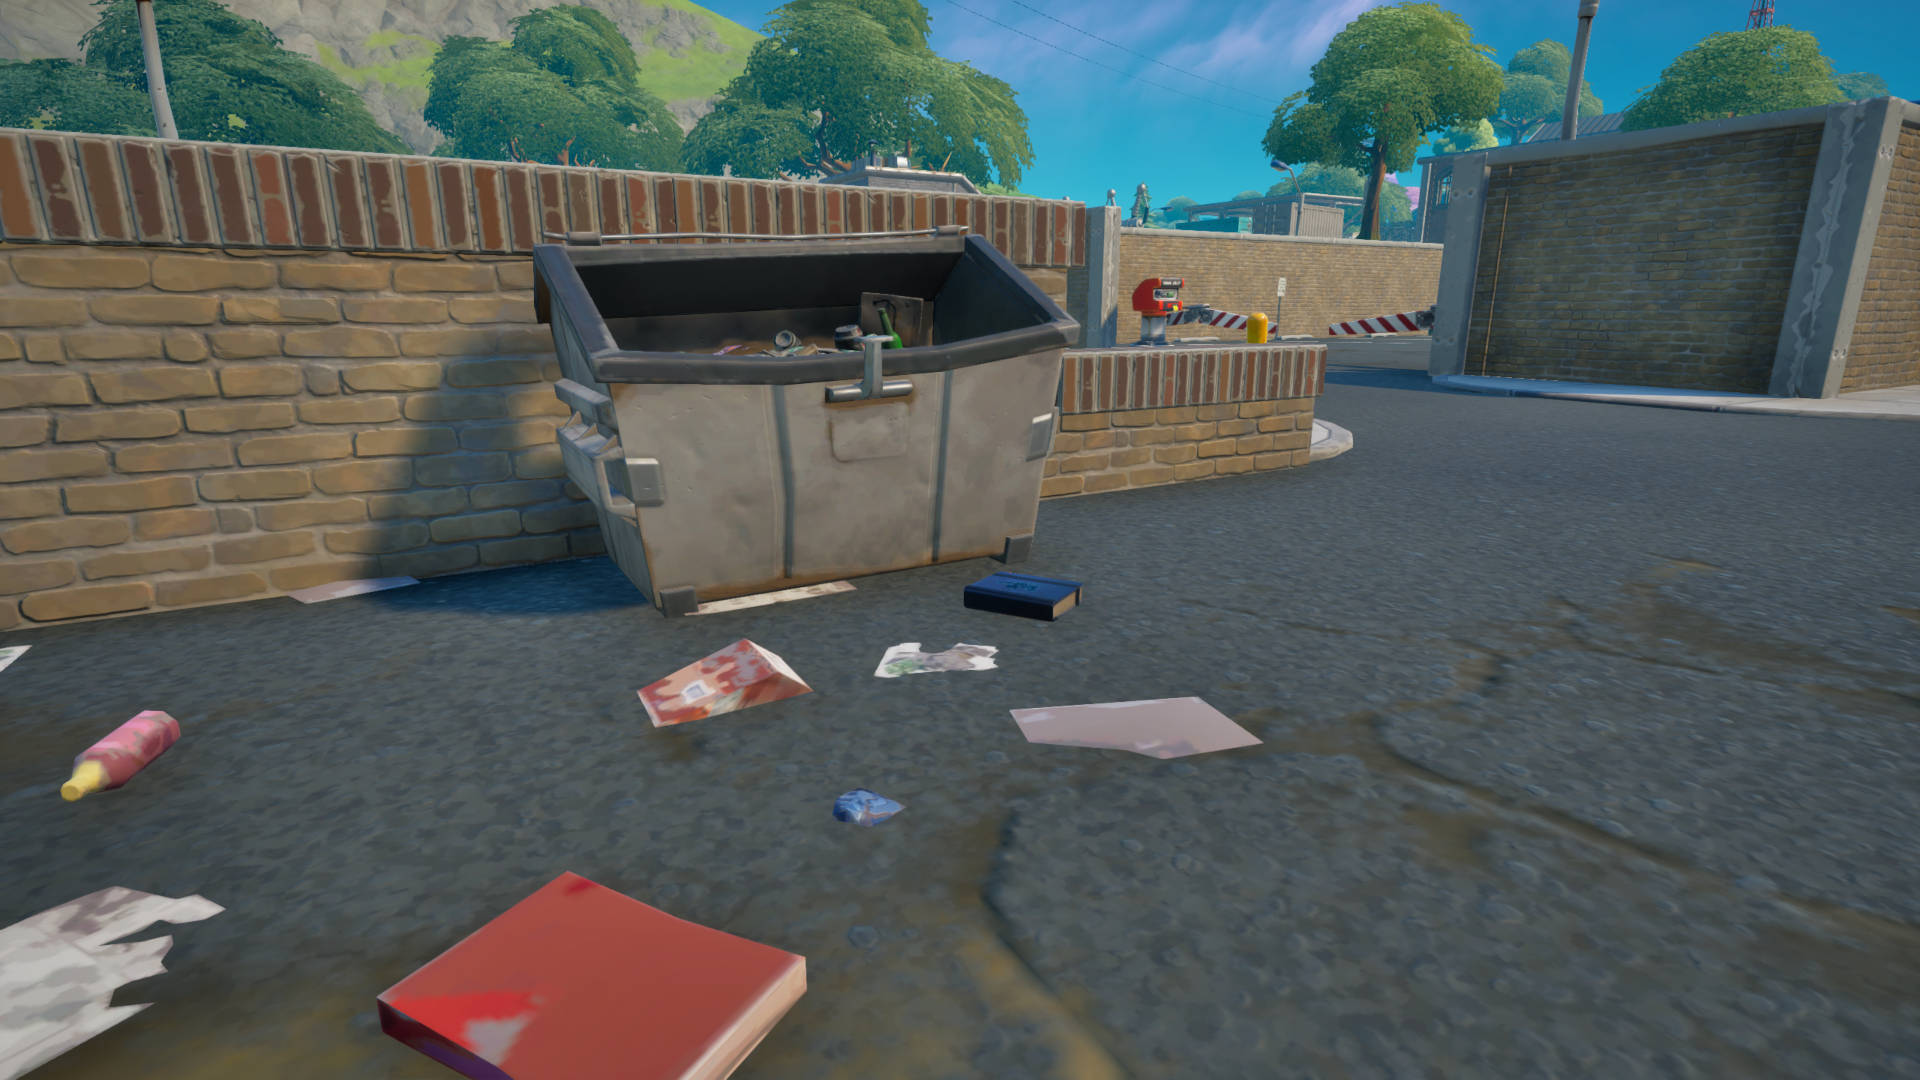 Where to search for books on explosions in Fortnite